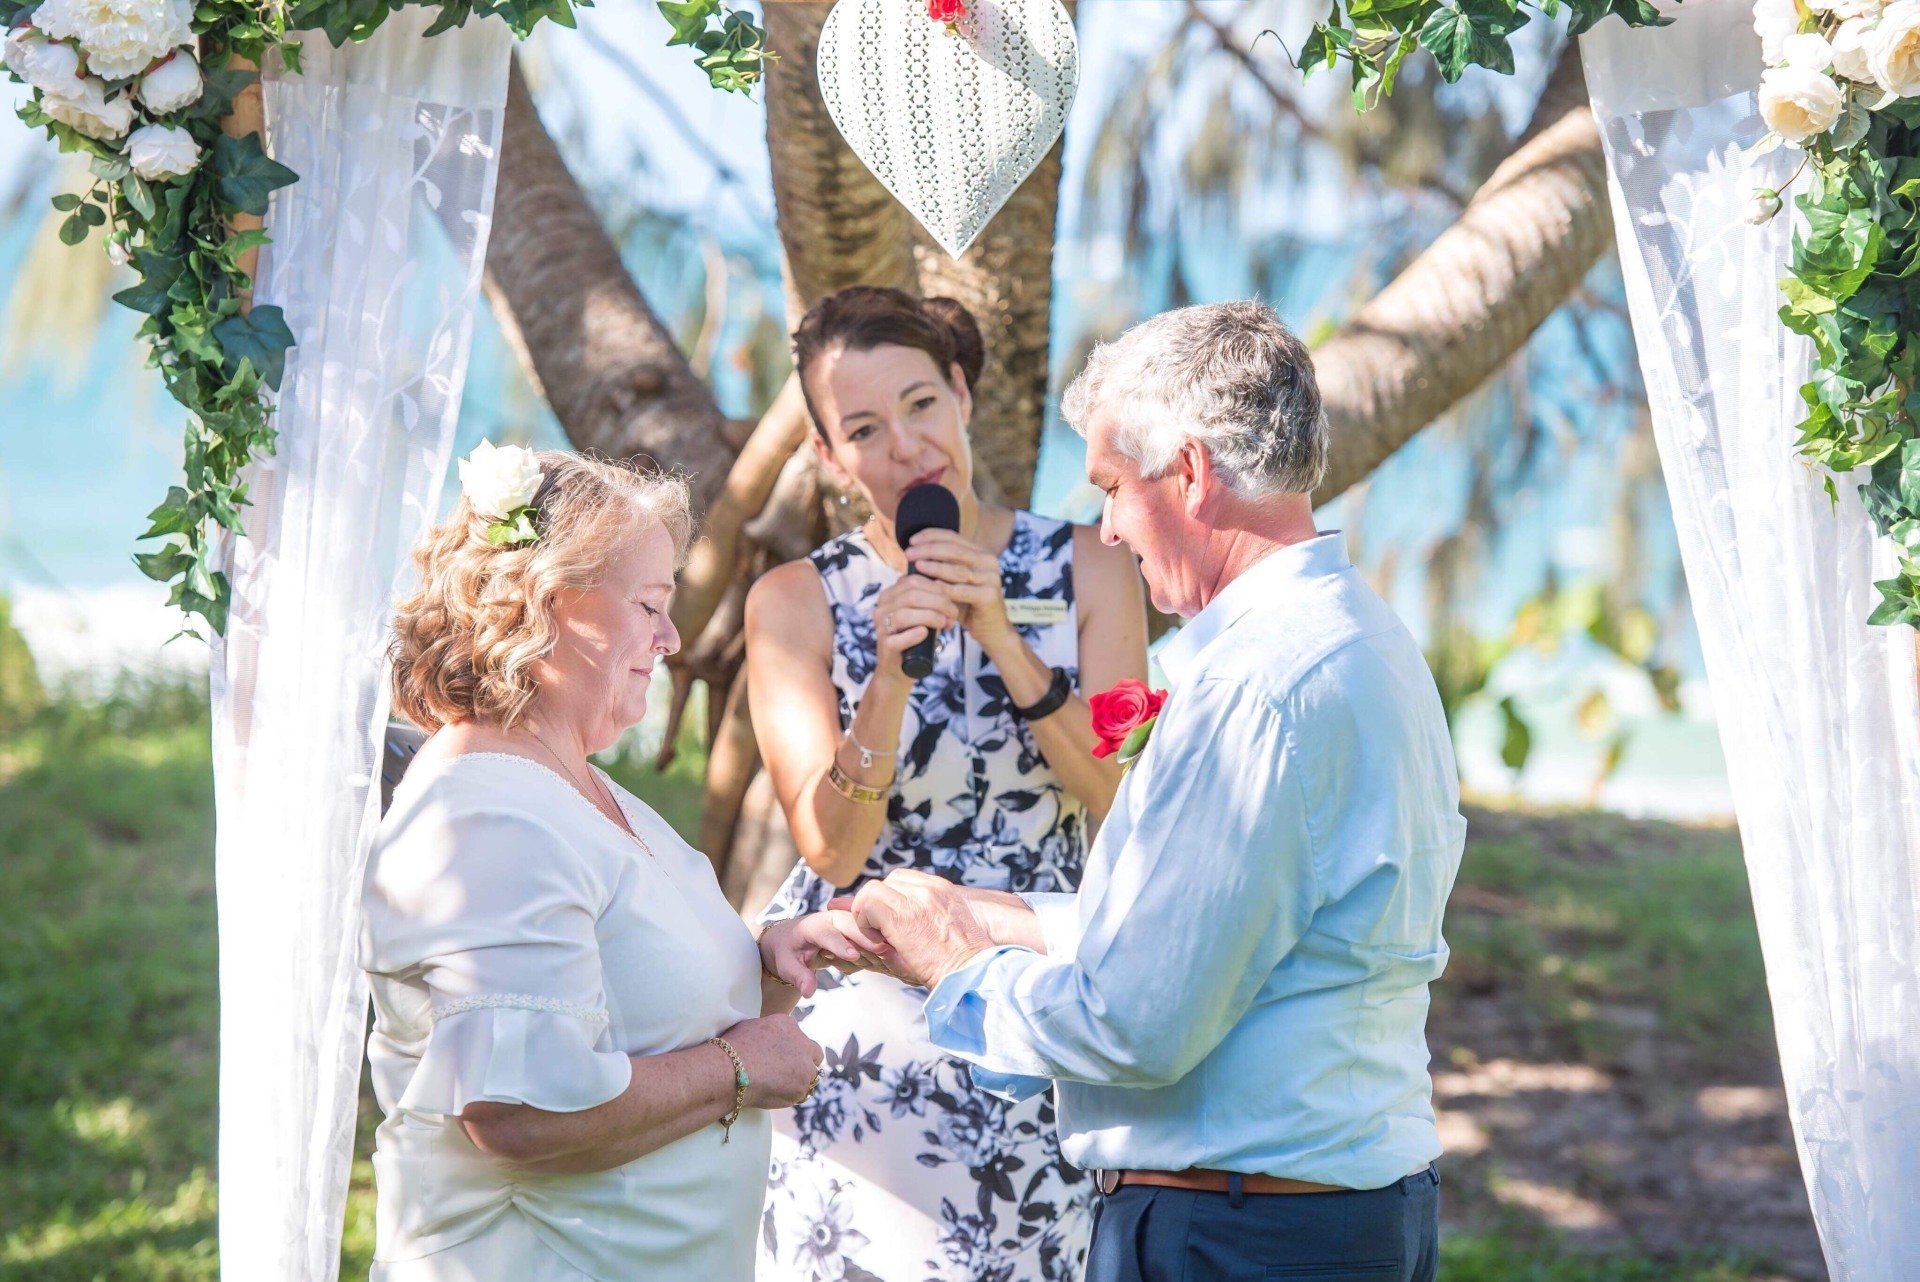 older couple putting rings on as the Noosa celebrant marries them under an arbor by the ocean